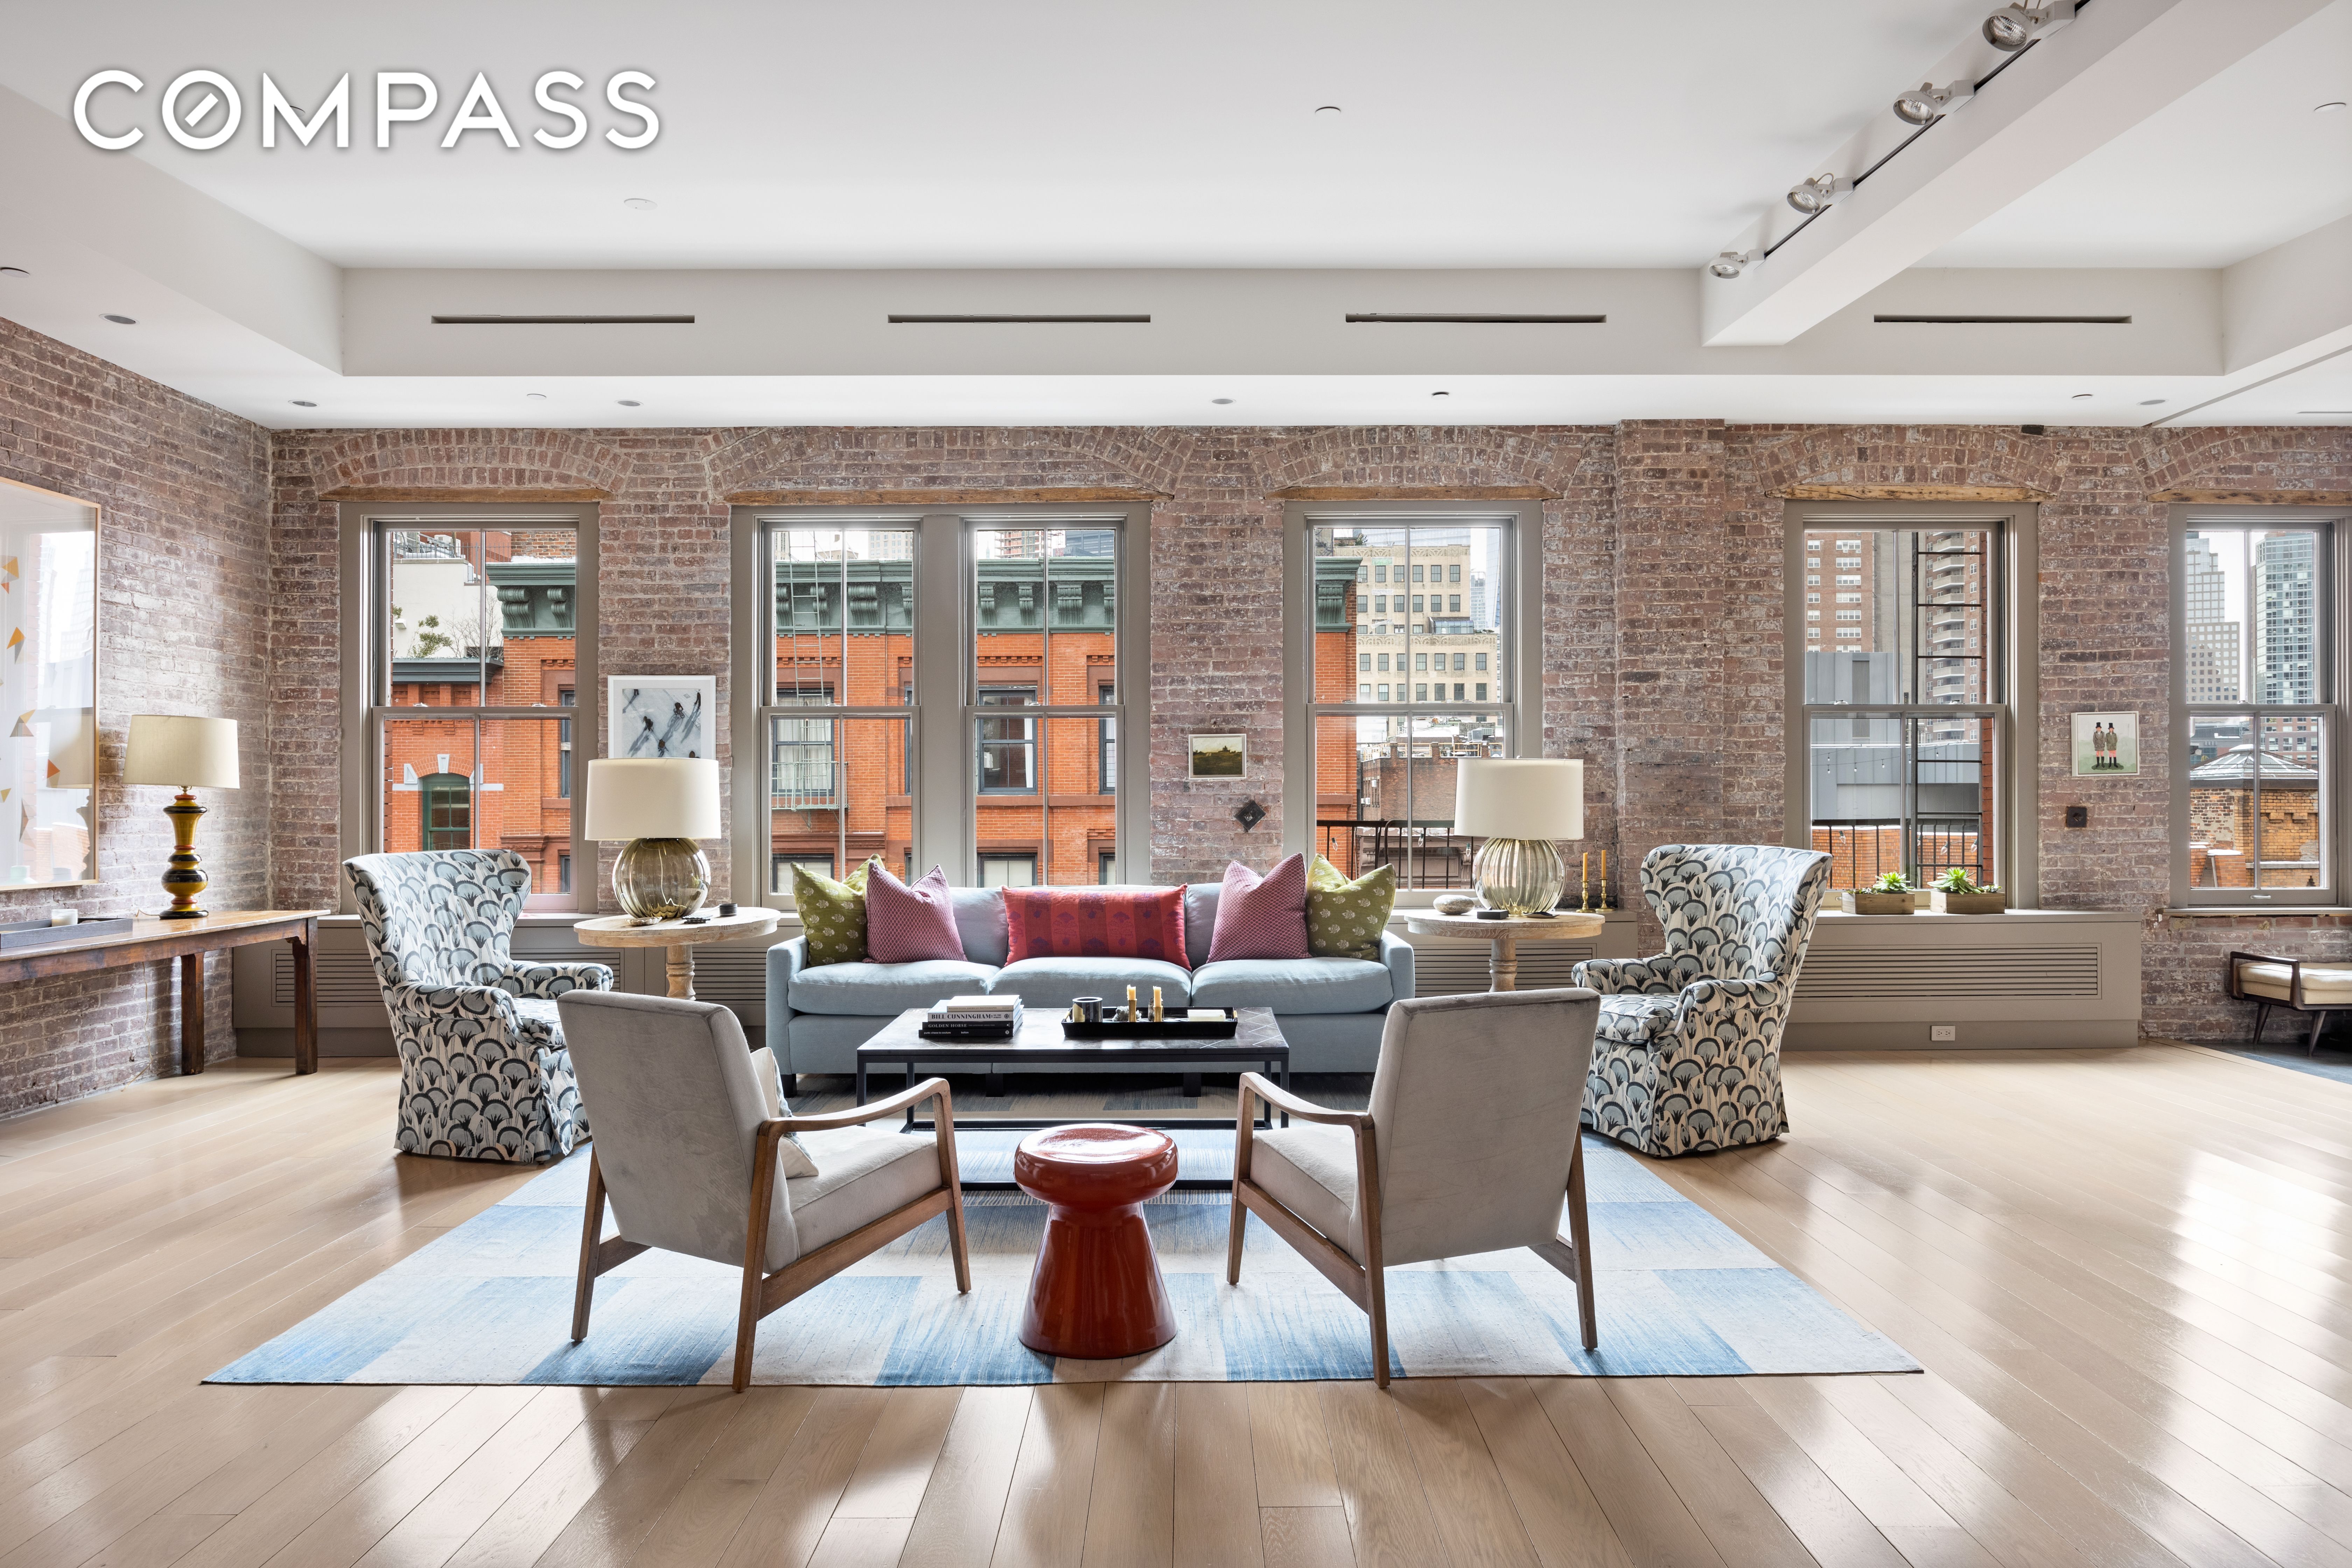 186 Franklin Street Ph, Tribeca, Downtown, NYC - 3 Bedrooms  
3.5 Bathrooms  
8 Rooms - 